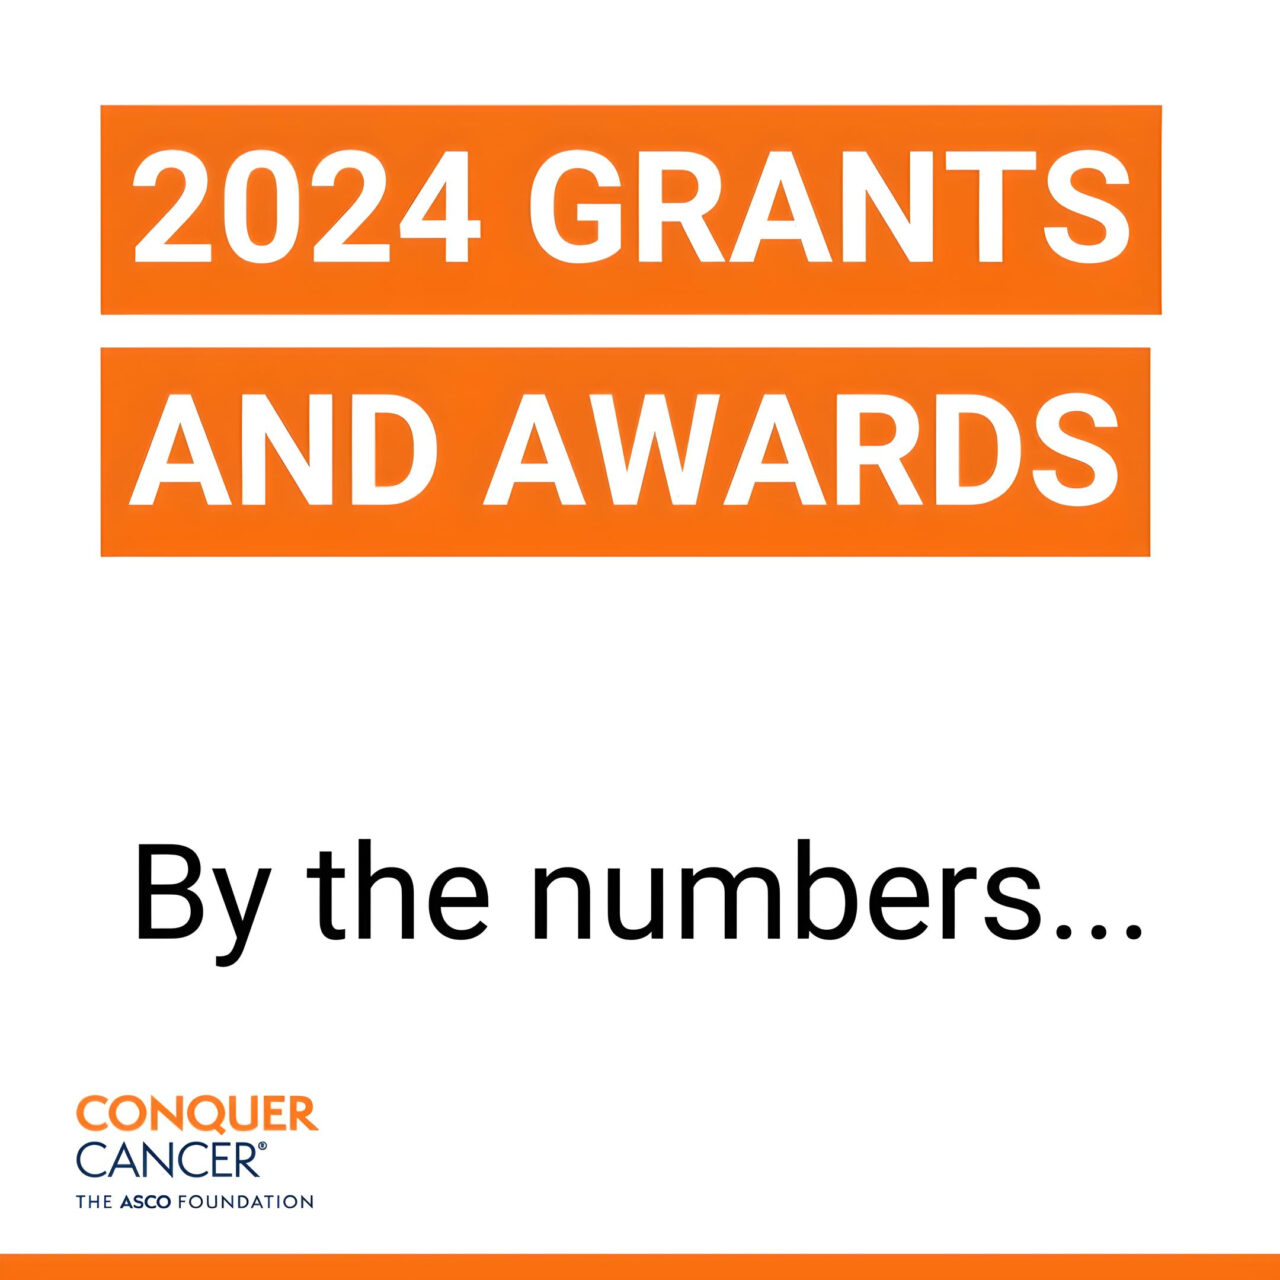 Conquer Cancer Foundation will distribute more than $11 million through over 400 grants awards to the best and brightest minds in cancer research